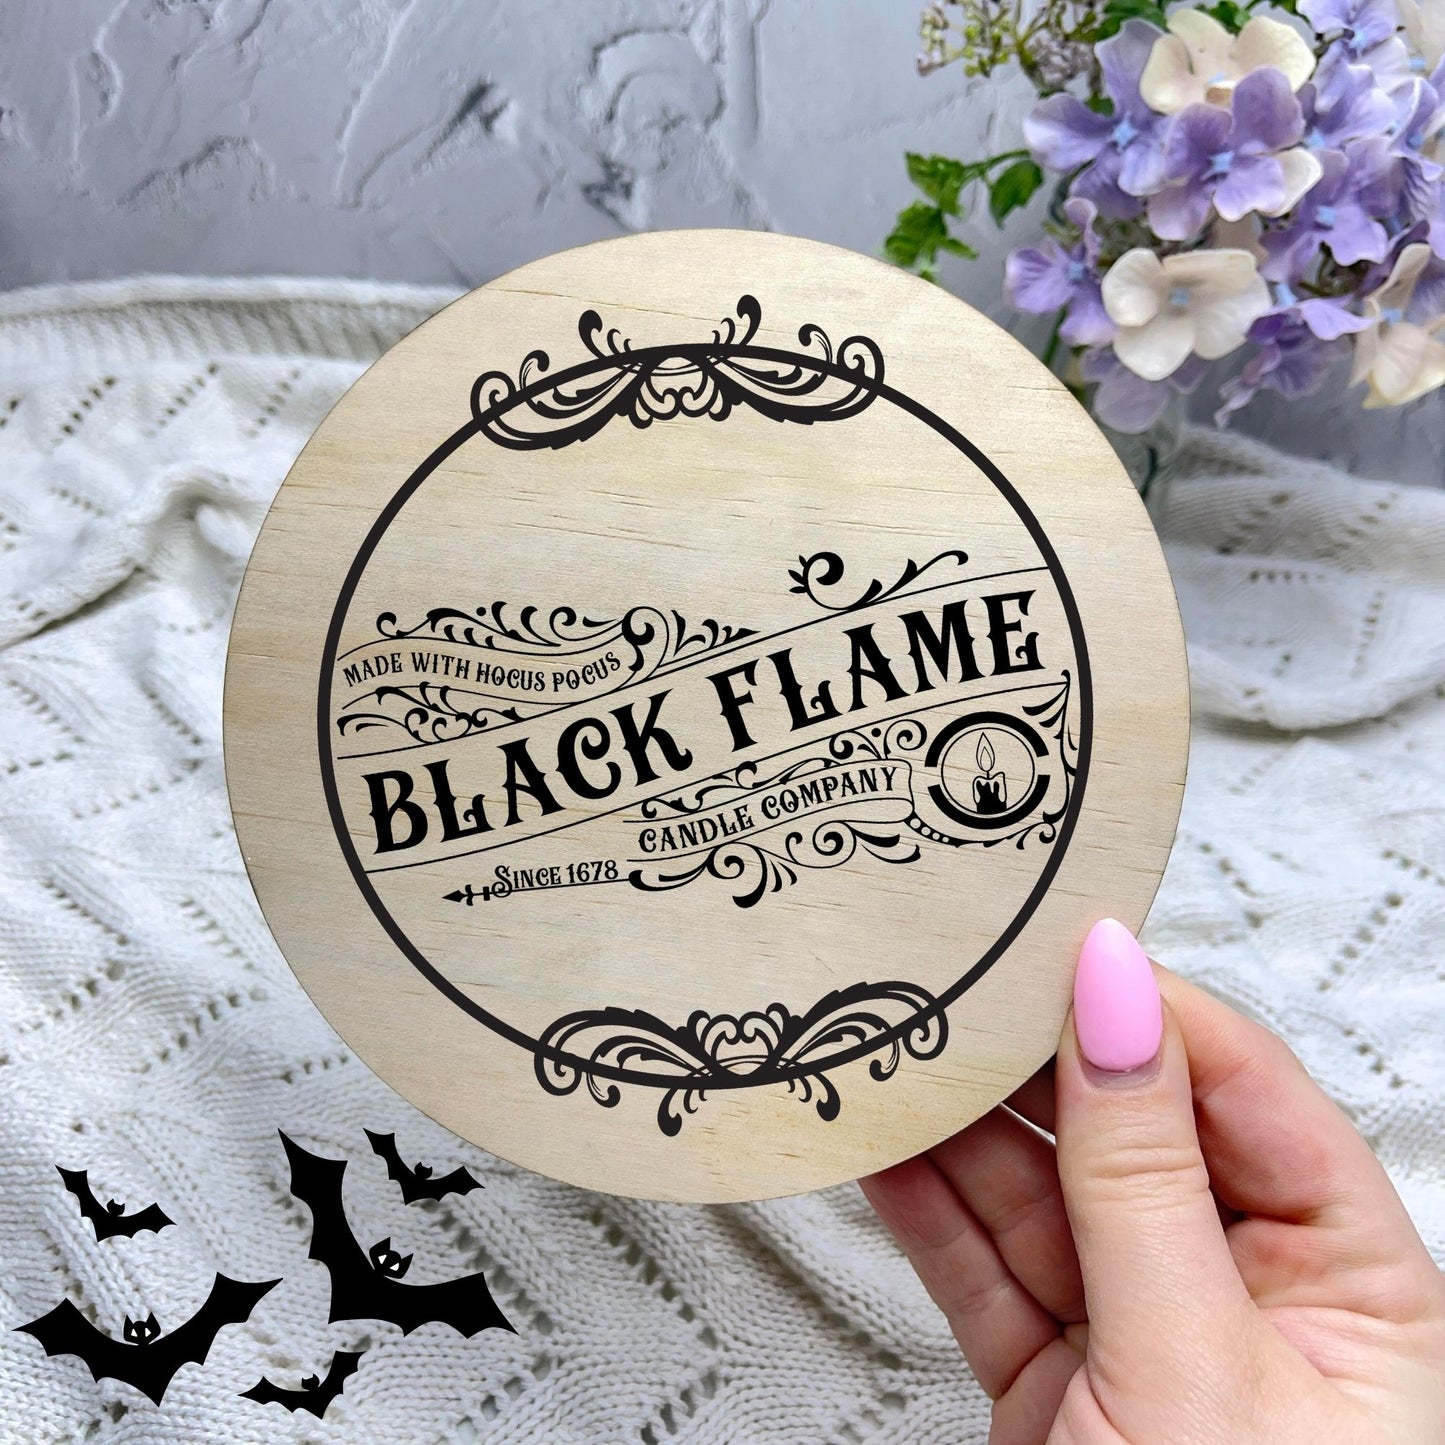 Black Flame sign, Halloween Decor, Spooky Vibes, hocus pocus sign, trick or treat decor, haunted house h61